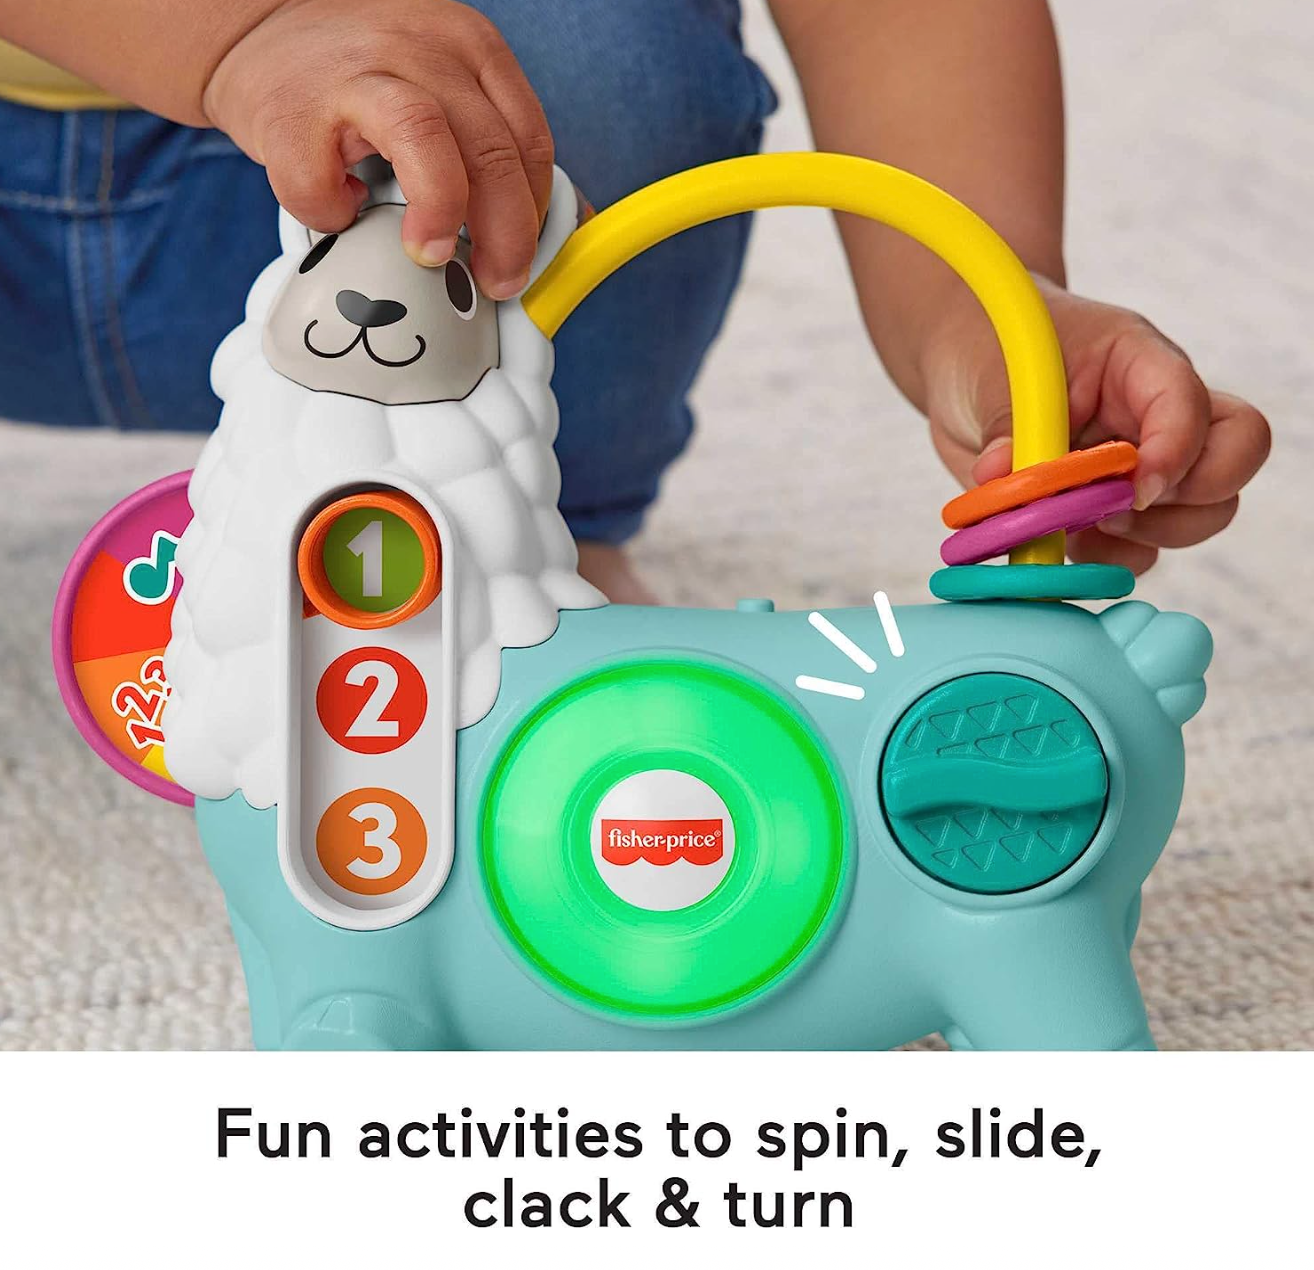 Fisher-Price Linkimals Learning Toy 123 Activity Llama With Interactive Music & Lights For Baby & Toddler Ages 9+ Months